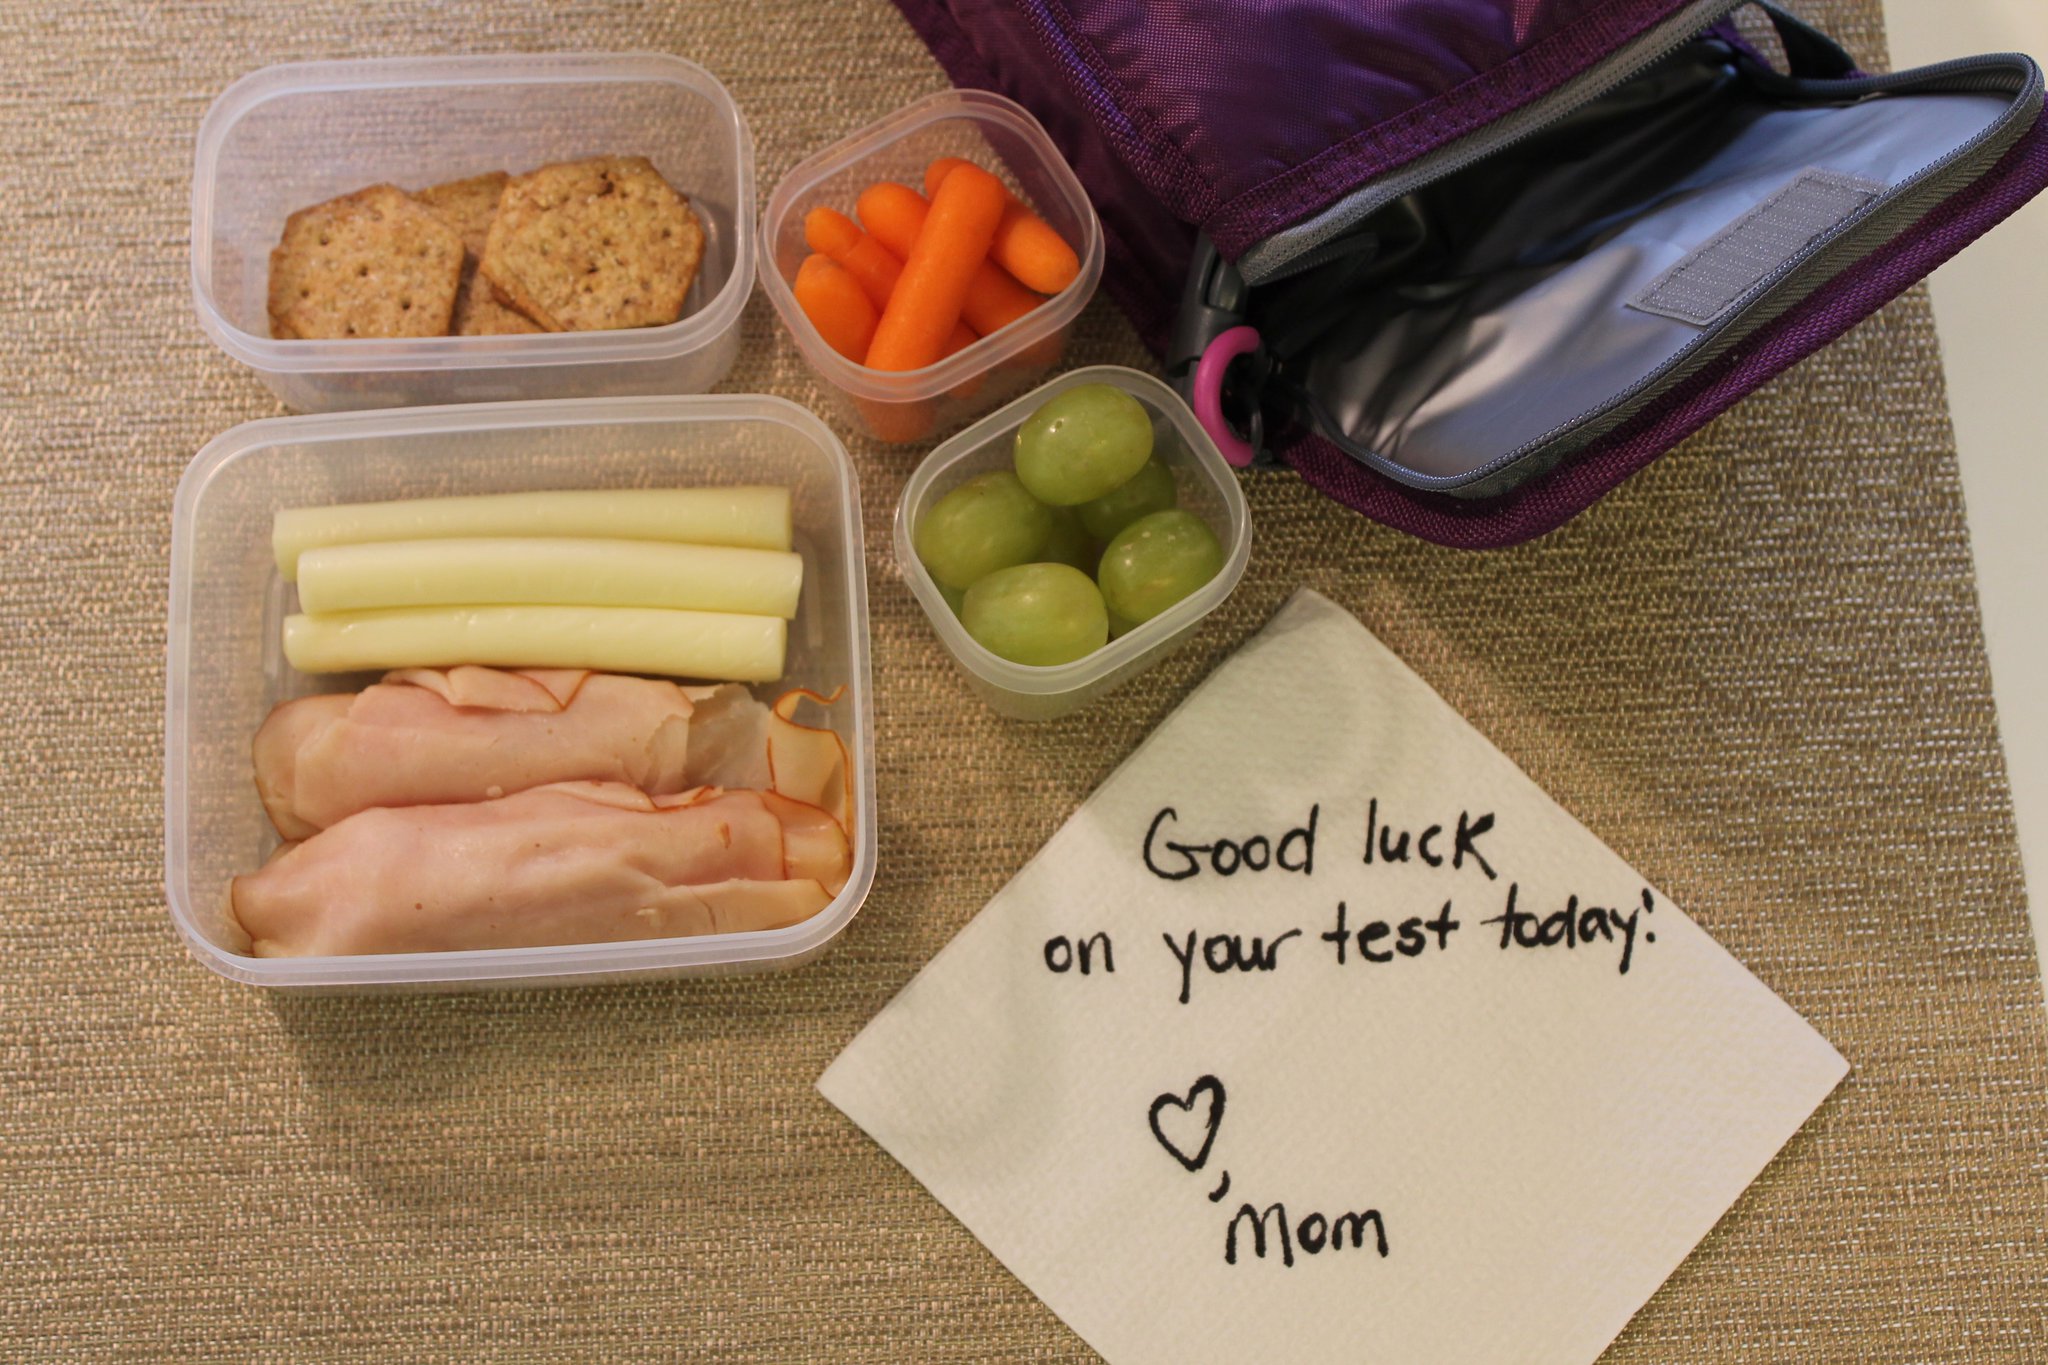 How to pack a healthy kids' lunch box